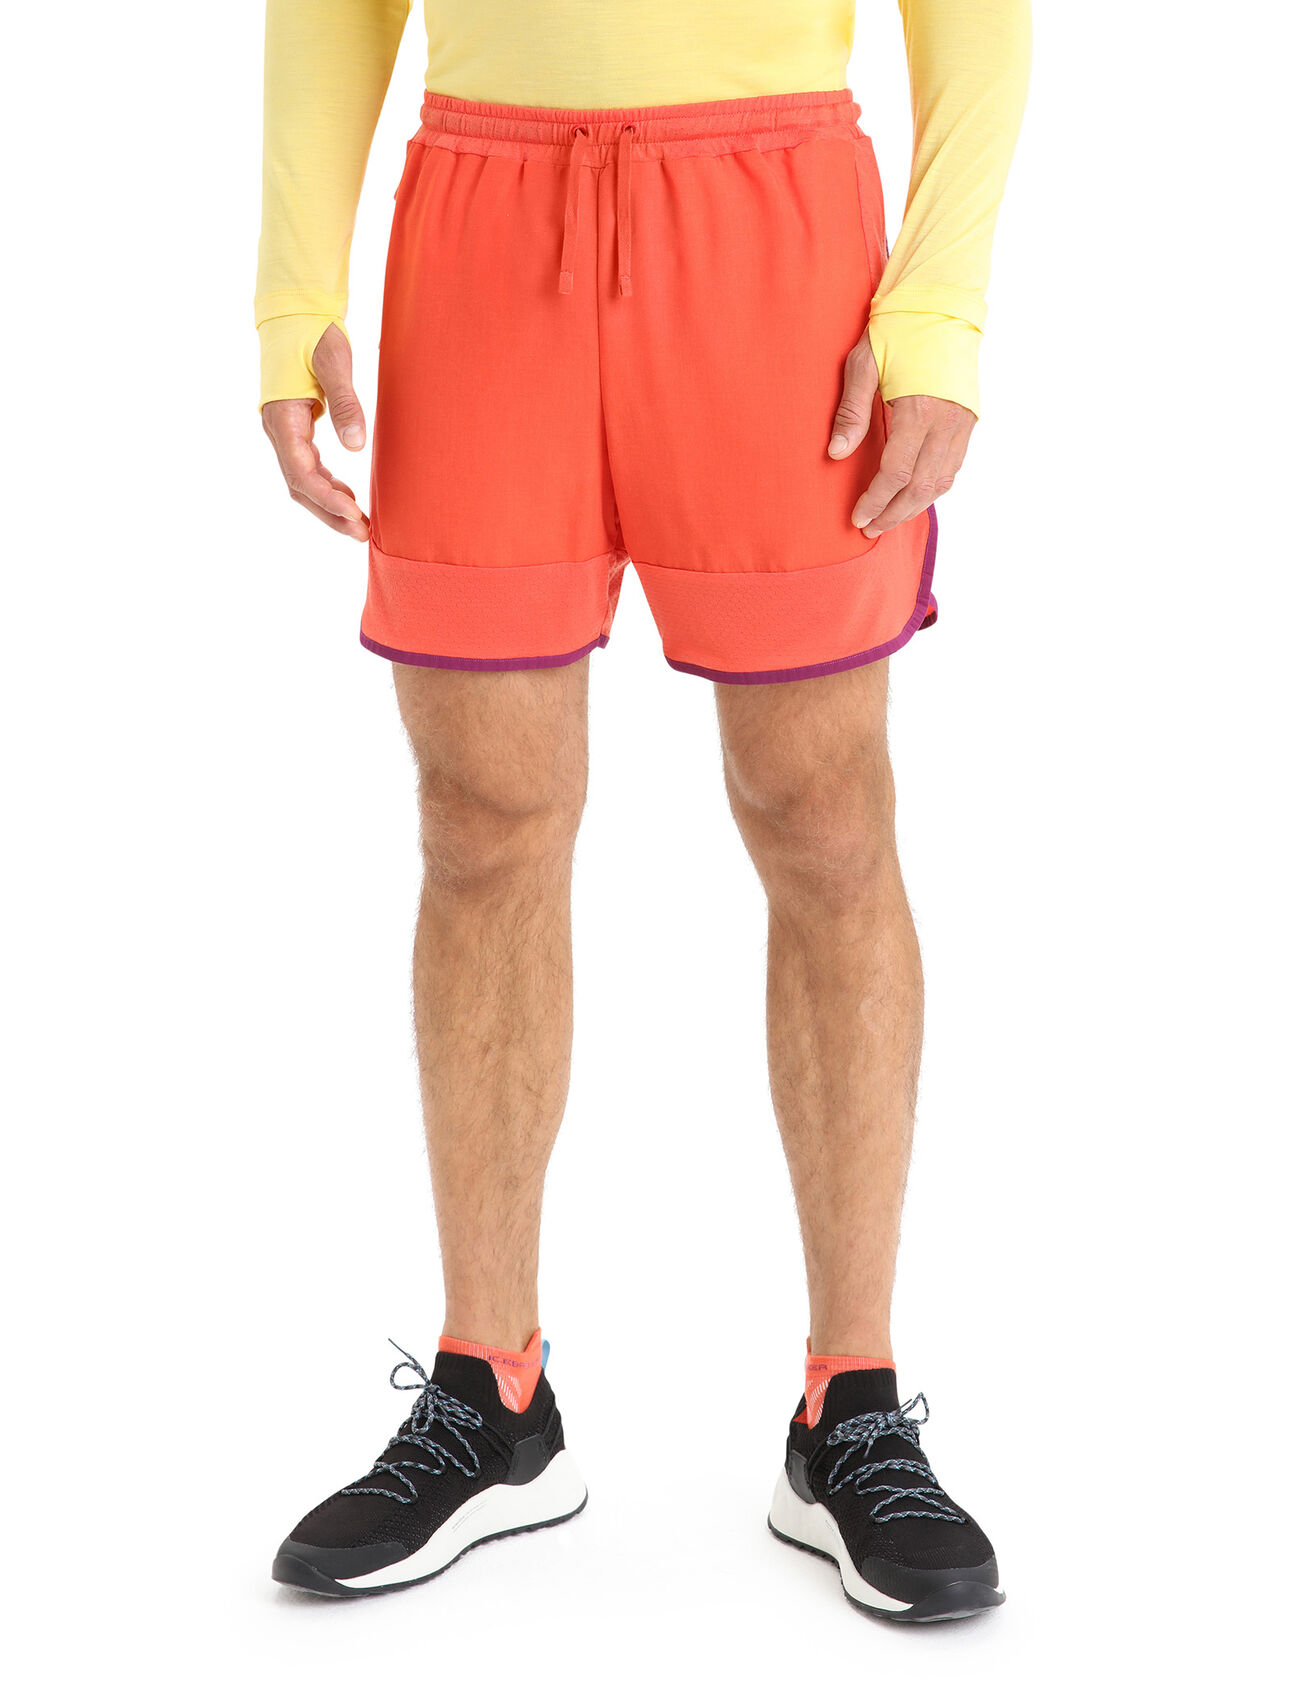 Mens ZoneKnit™ Merino Blend Shorts Lightweight, highly breathable shorts designed for running, the ZoneKnit™ Shorts combine our Cool-Lite™ jersey fabric with body-mapped panels of Cool-Lite eyelet mesh for enhanced temperature regulation.